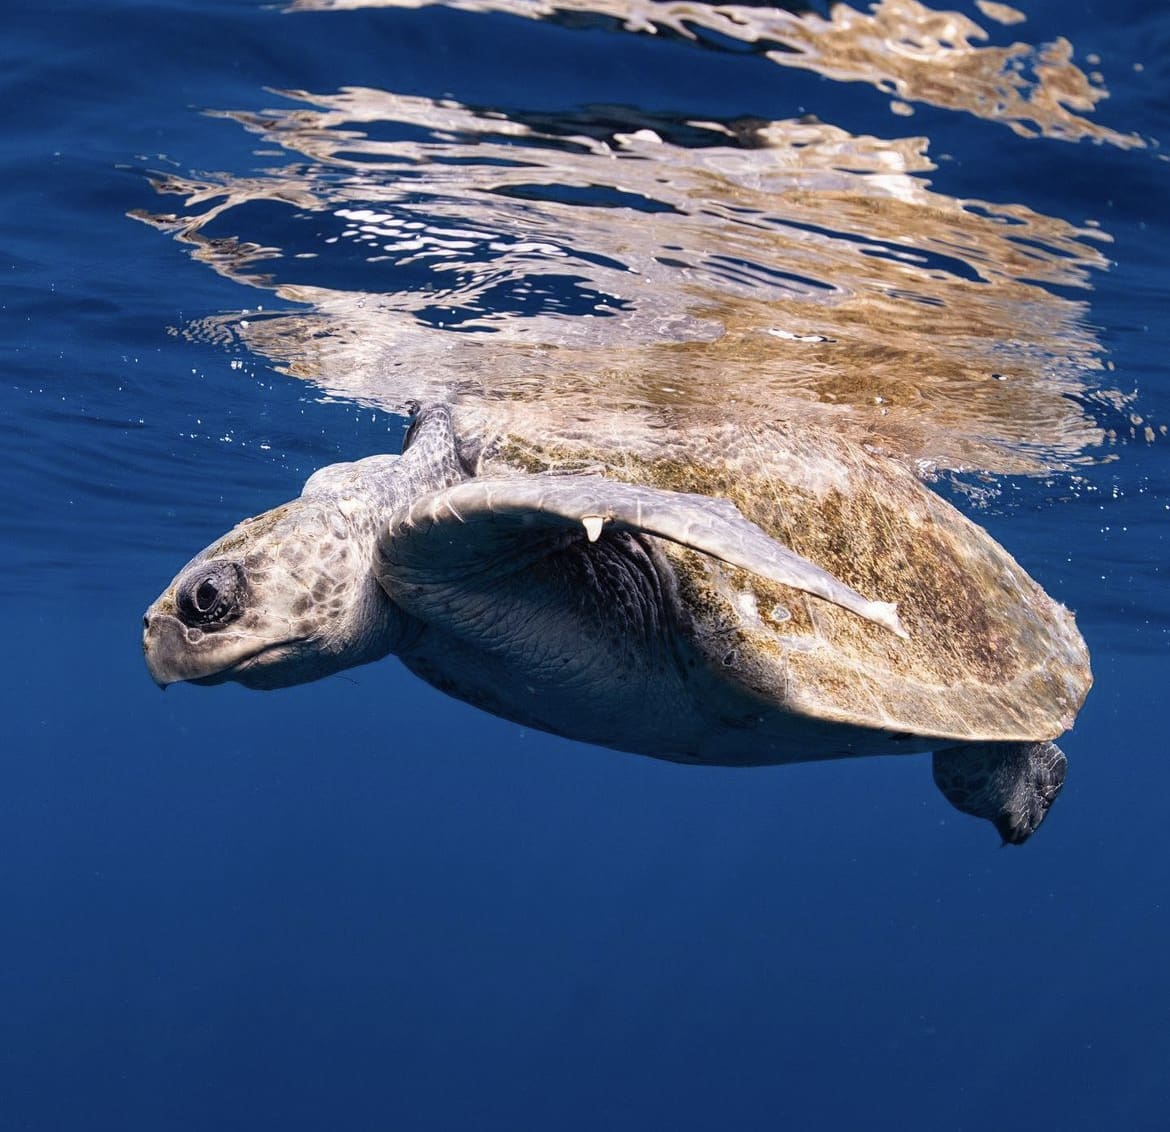 Sea turtle floats at the water's surface